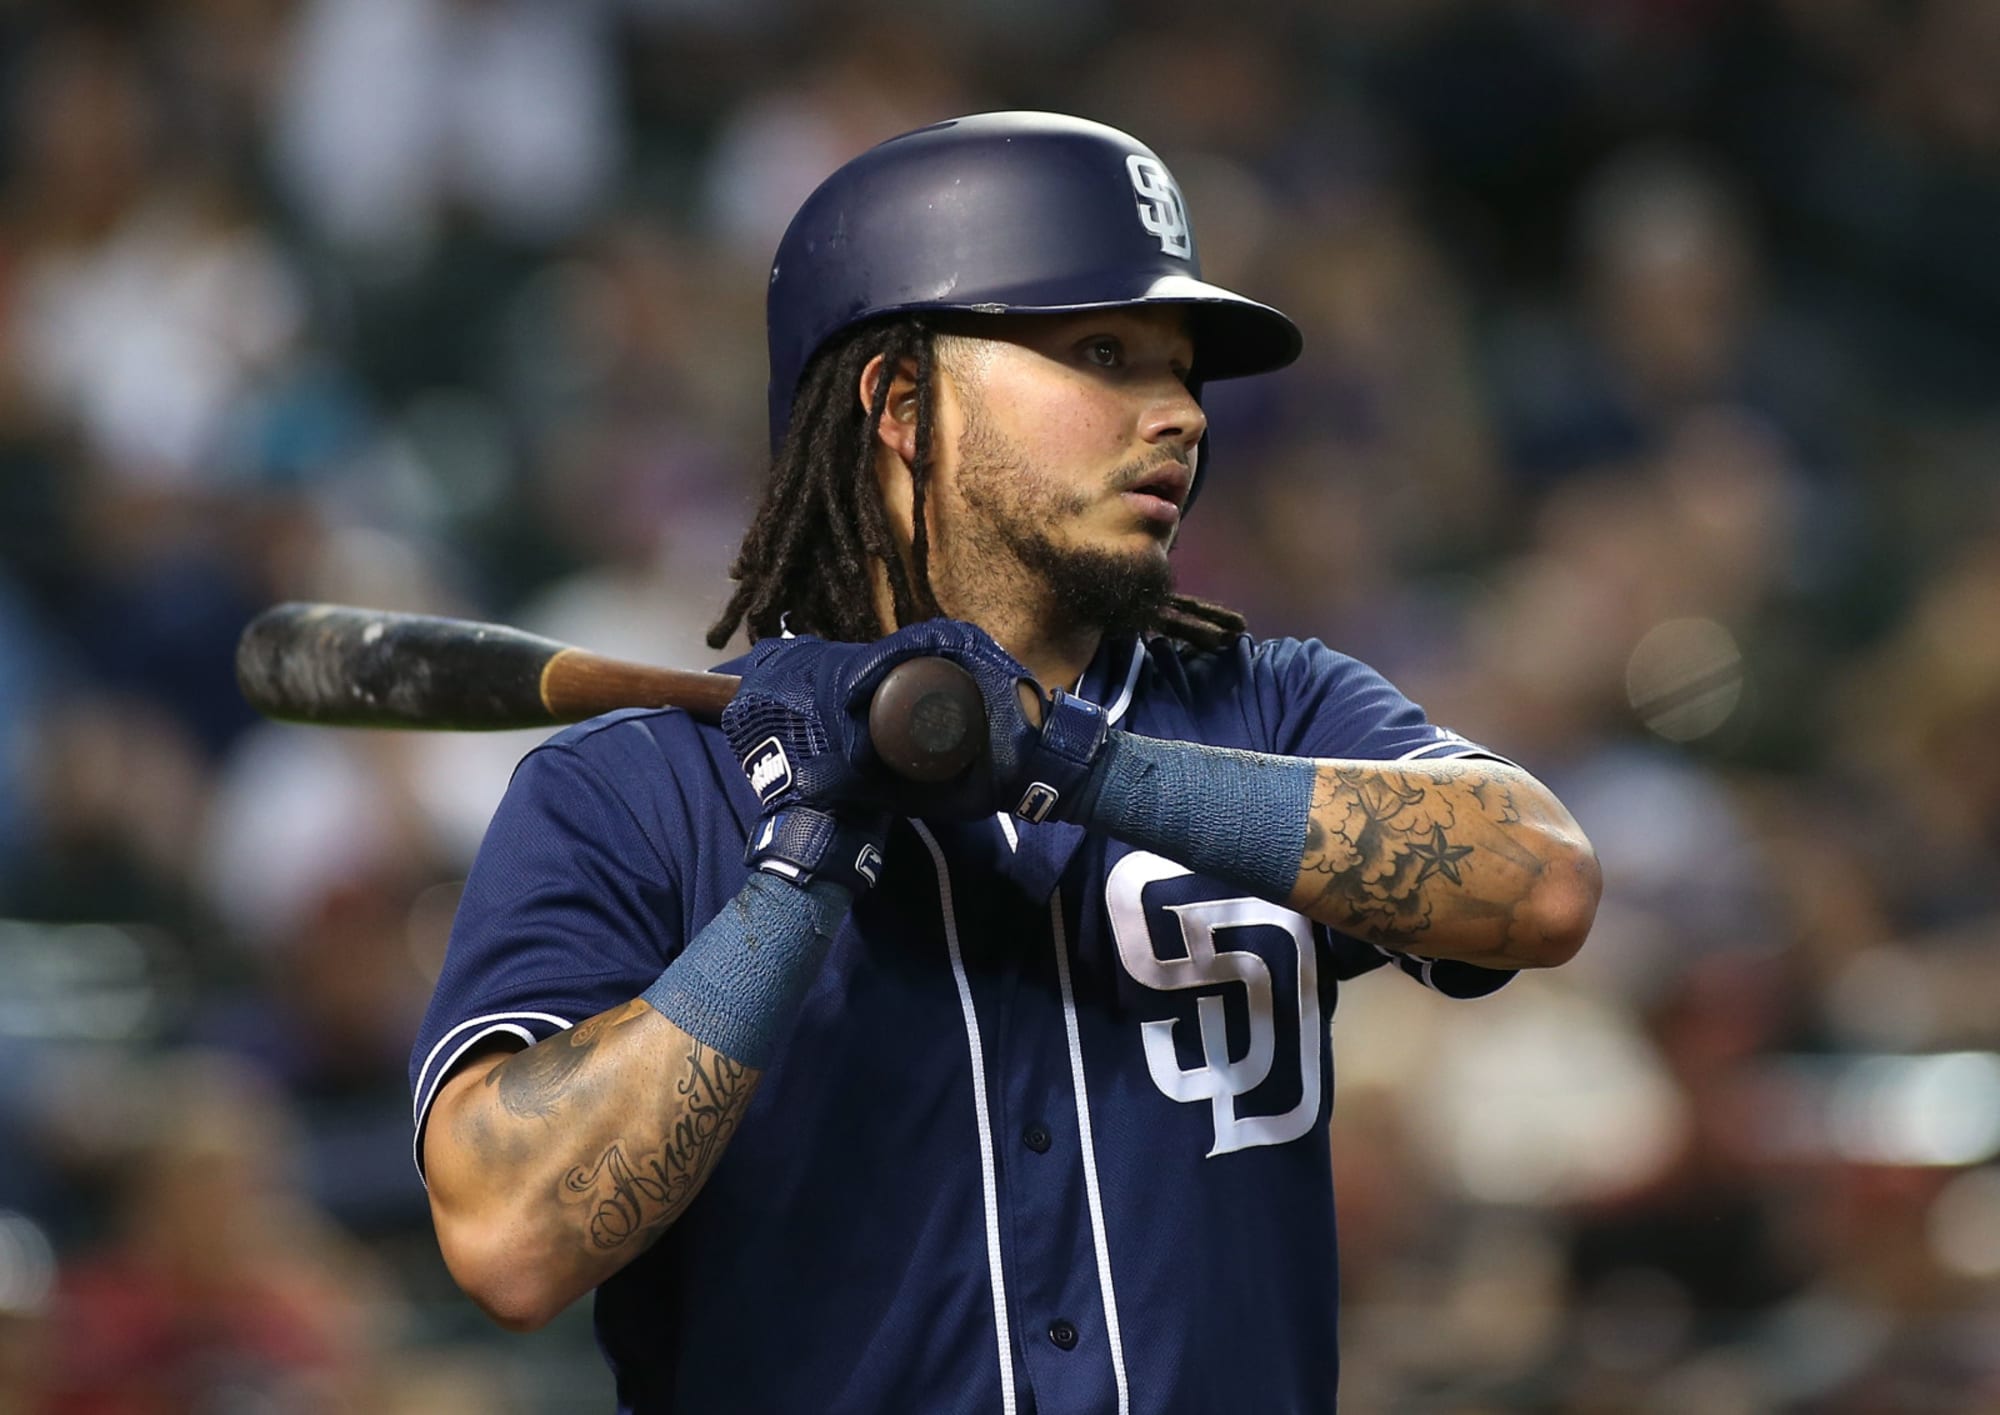 San Diego Padres Need Freddy Galvis to Snap Out of His Funk